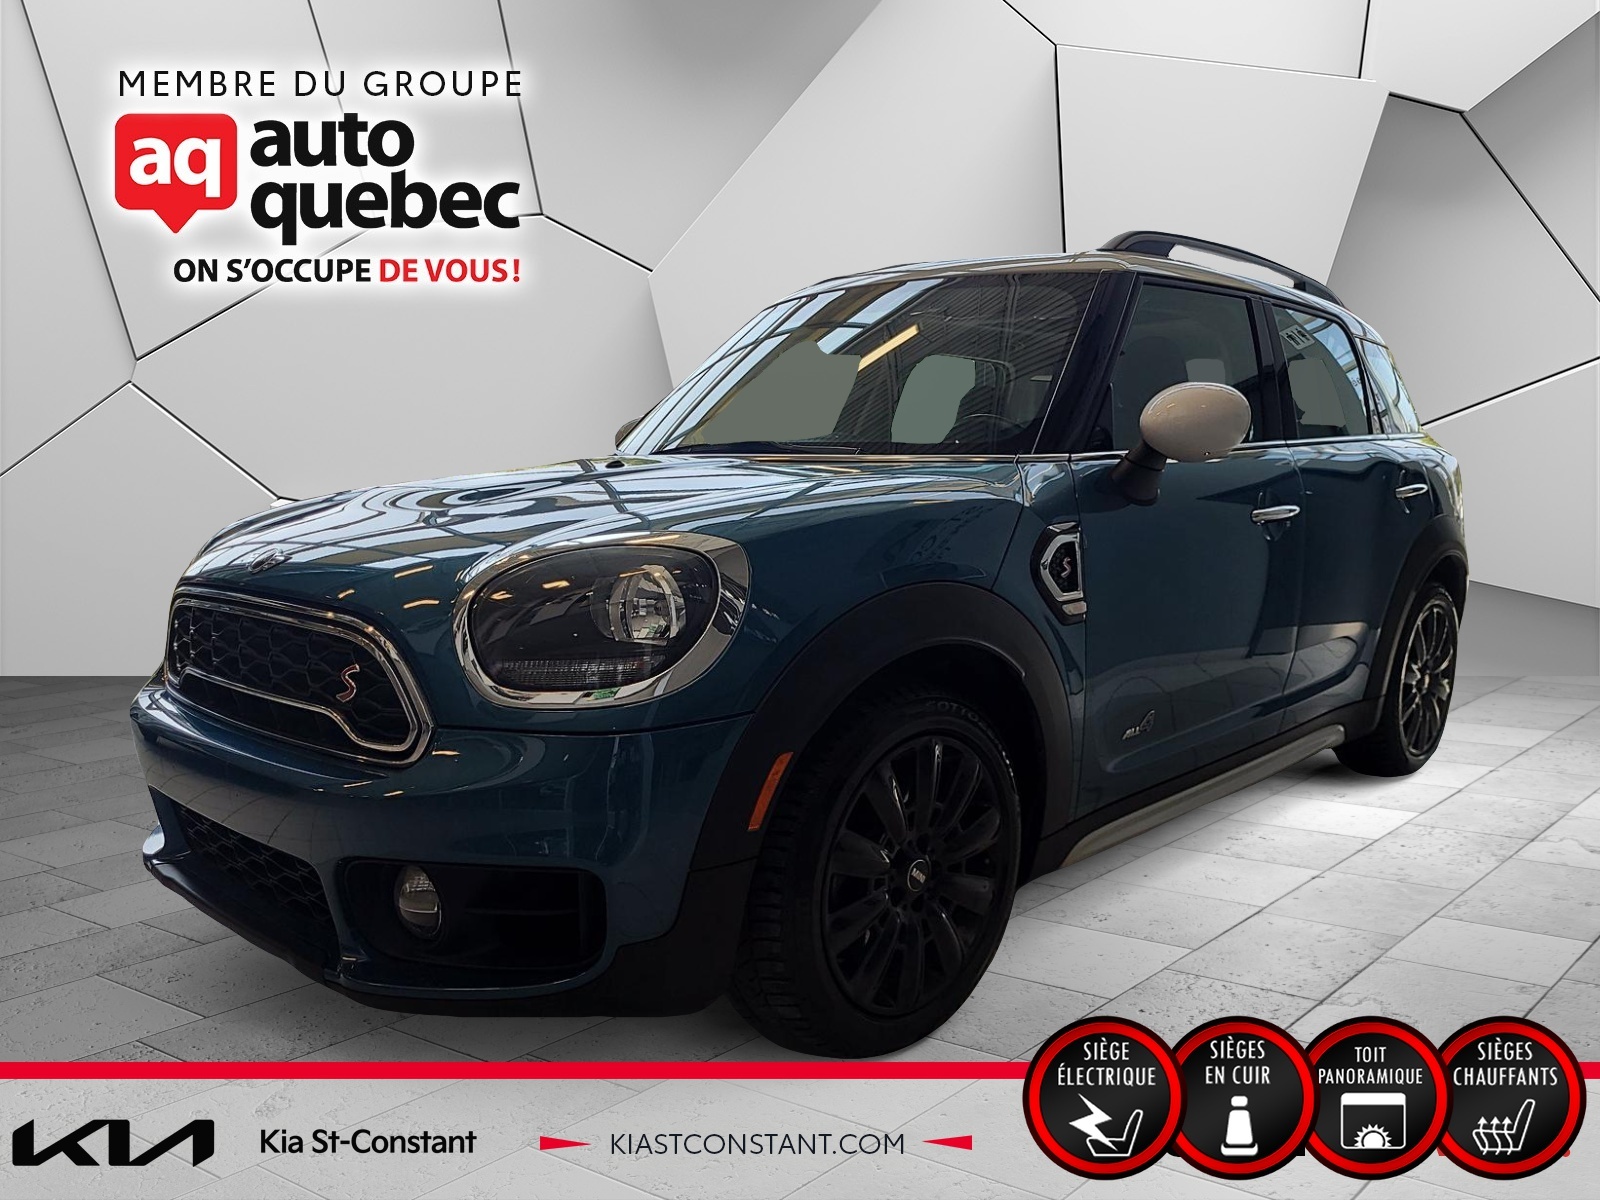 2017 MINI Cooper Countryman Awd Cuir Écran Mags Toit panoramique Mags noirs 